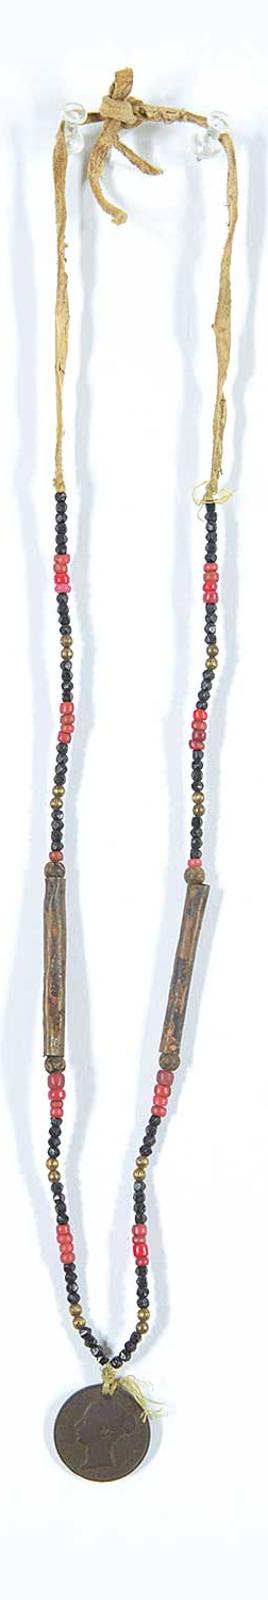 First Nations Basket School - Red and Black Beaded Necklace with 1841 British Coin Pendant